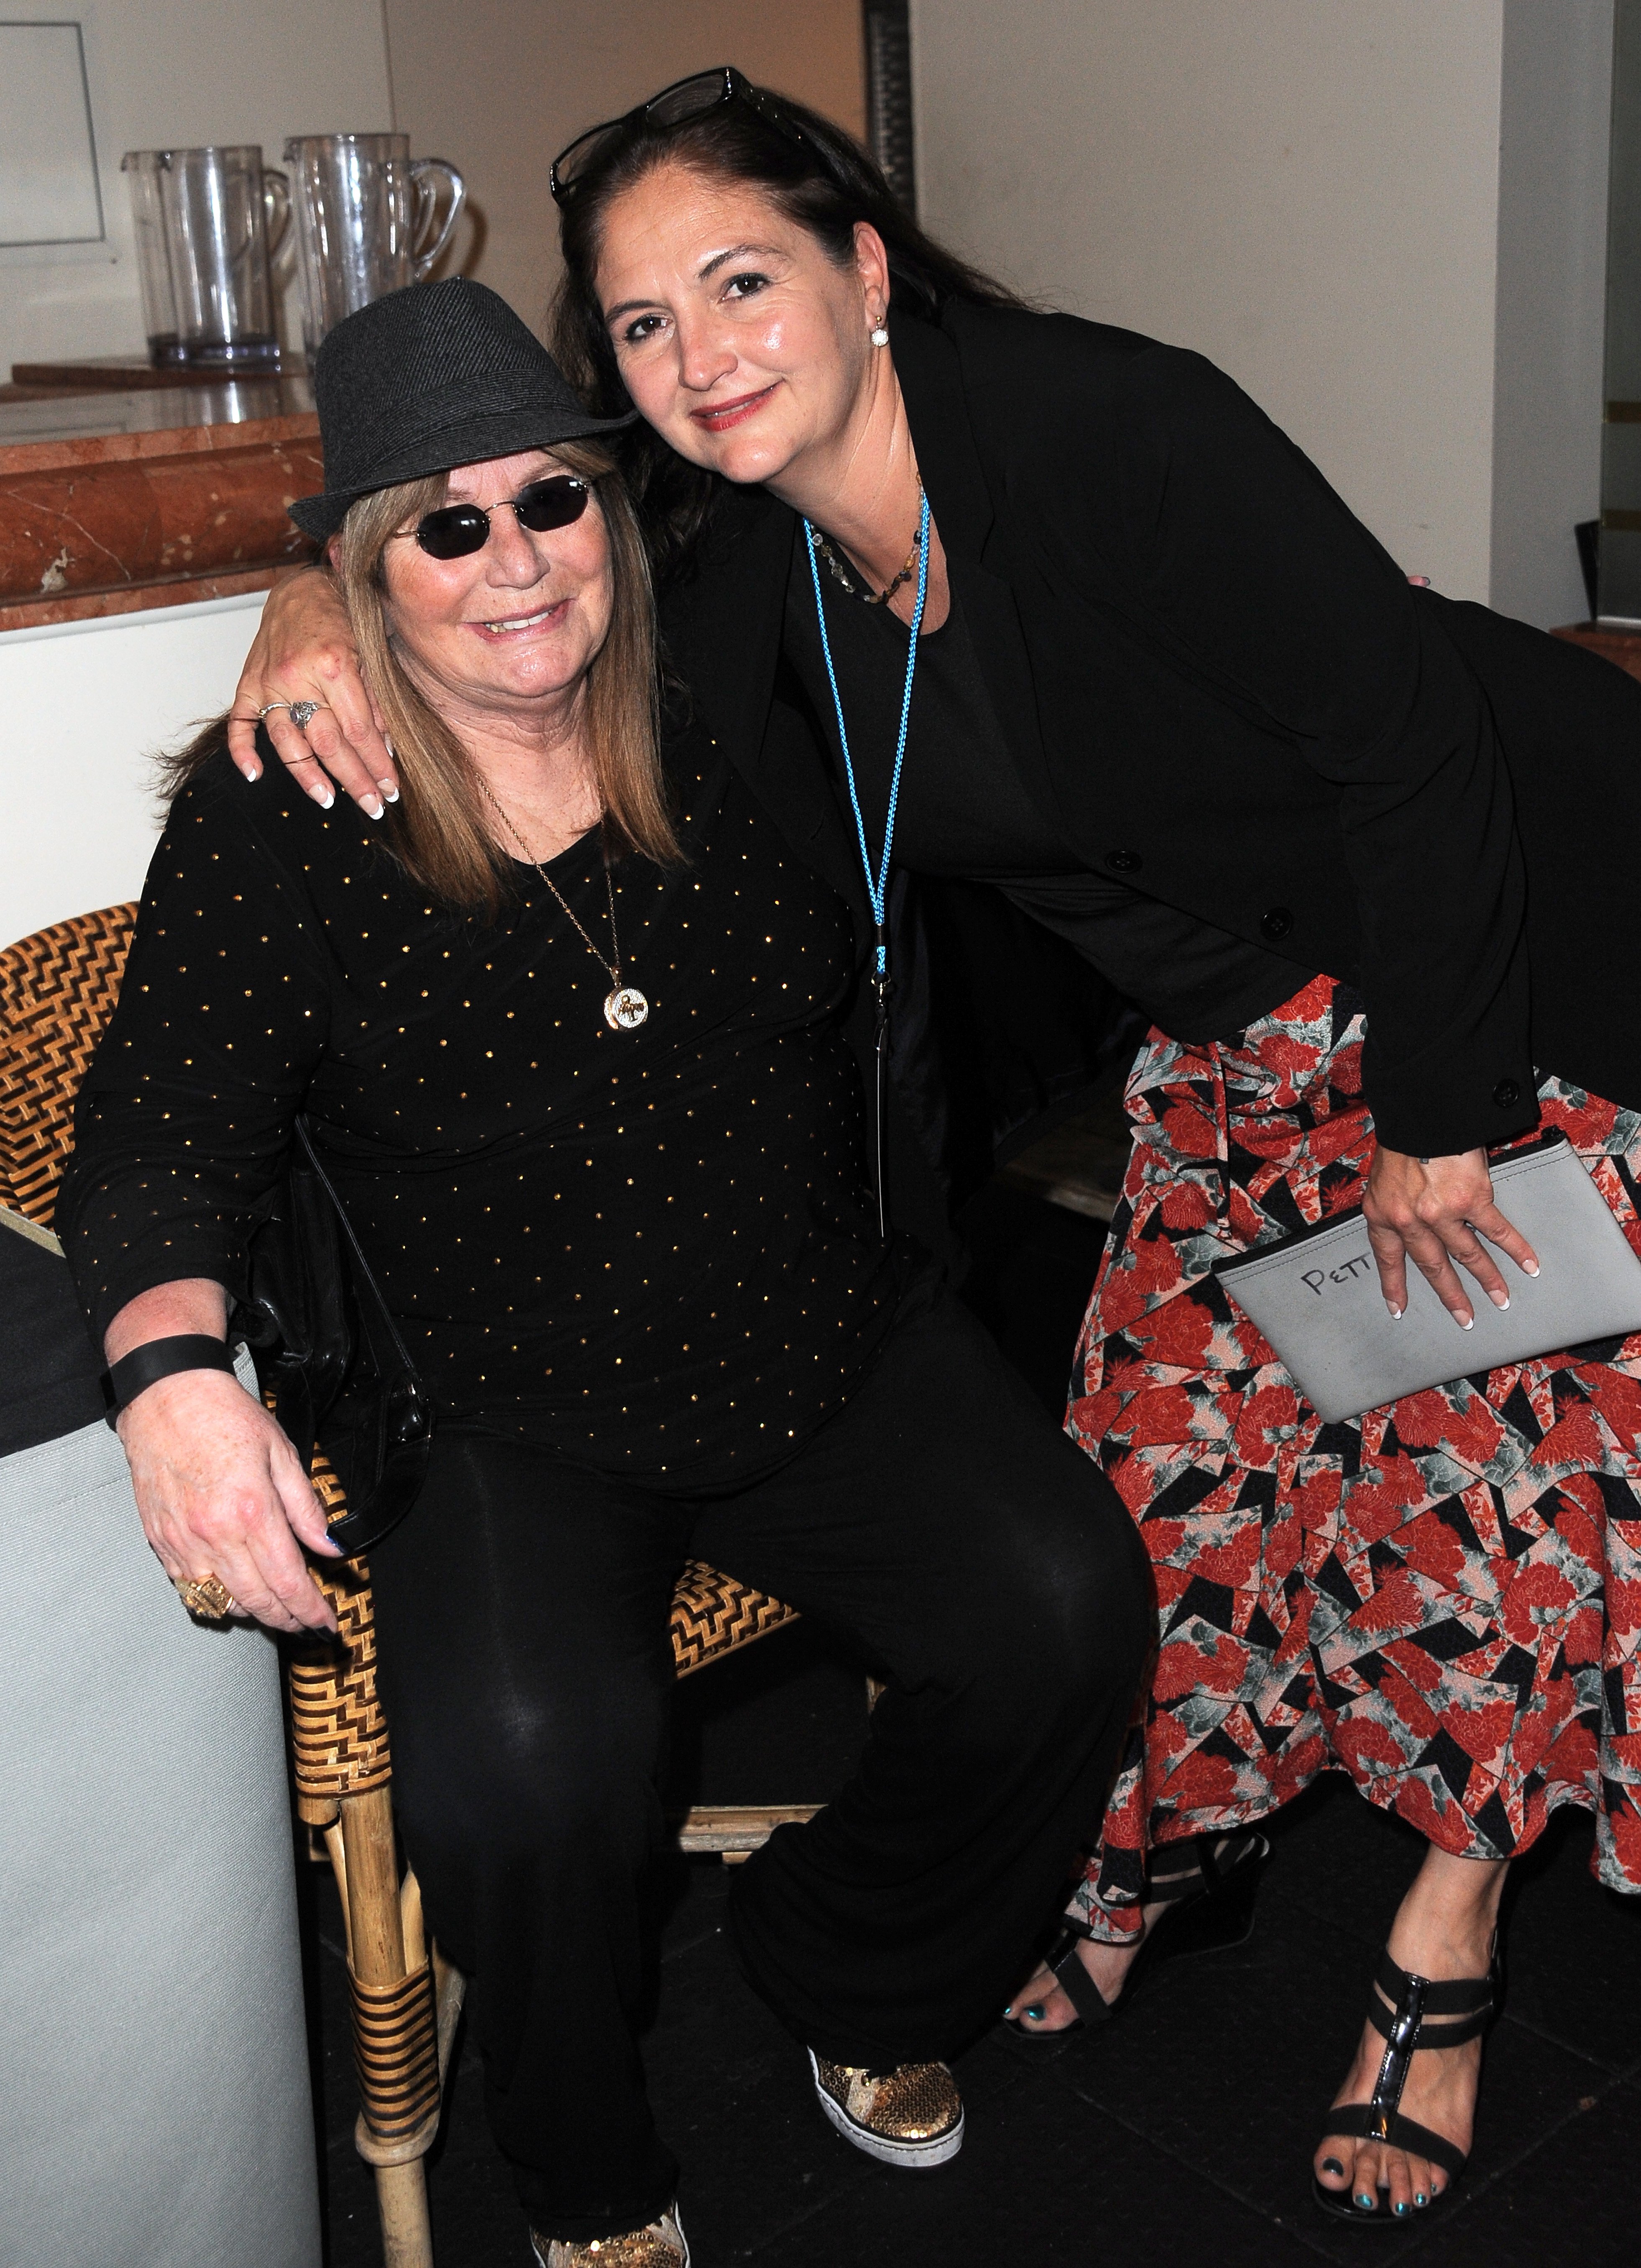 Director/actress Penny Marshall and daughter/actress Tracy Reiner at The Hollywood Show held at The Westin Hotel LAX on January 24, 2015 in Los Angeles, California. | Source: Getty Images